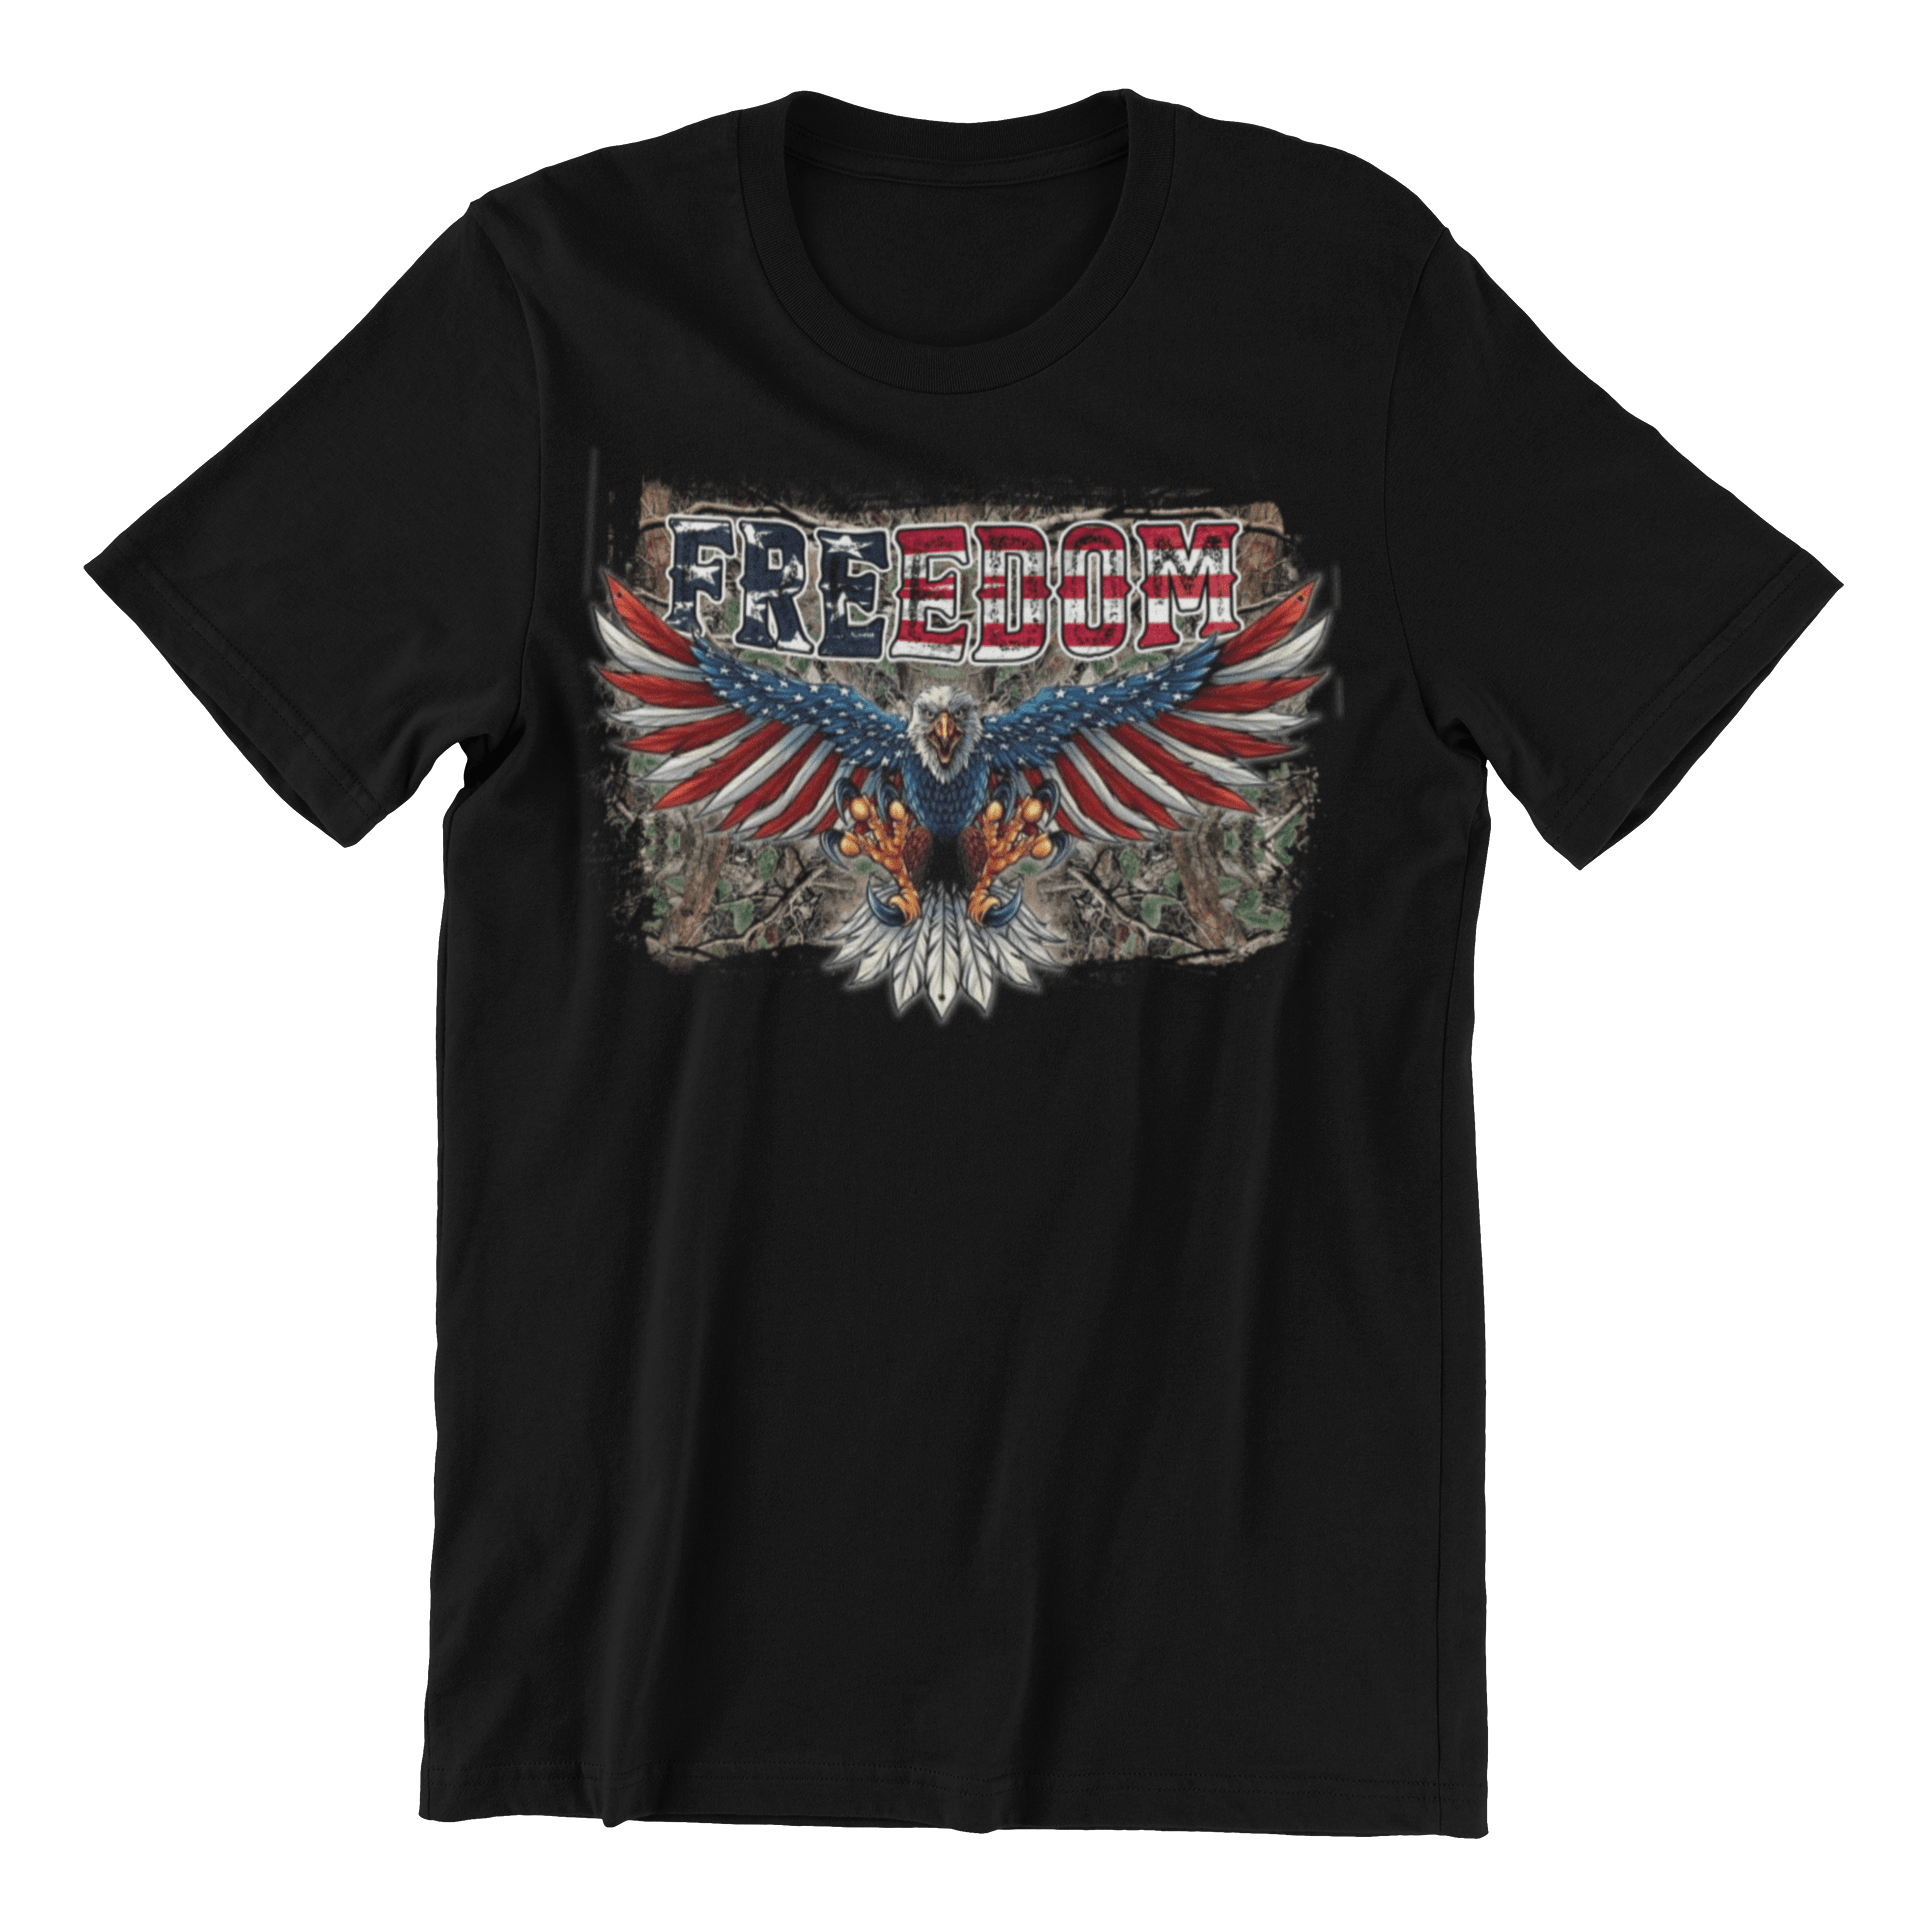 Get Your Freedom Eagle T-Shirt Today